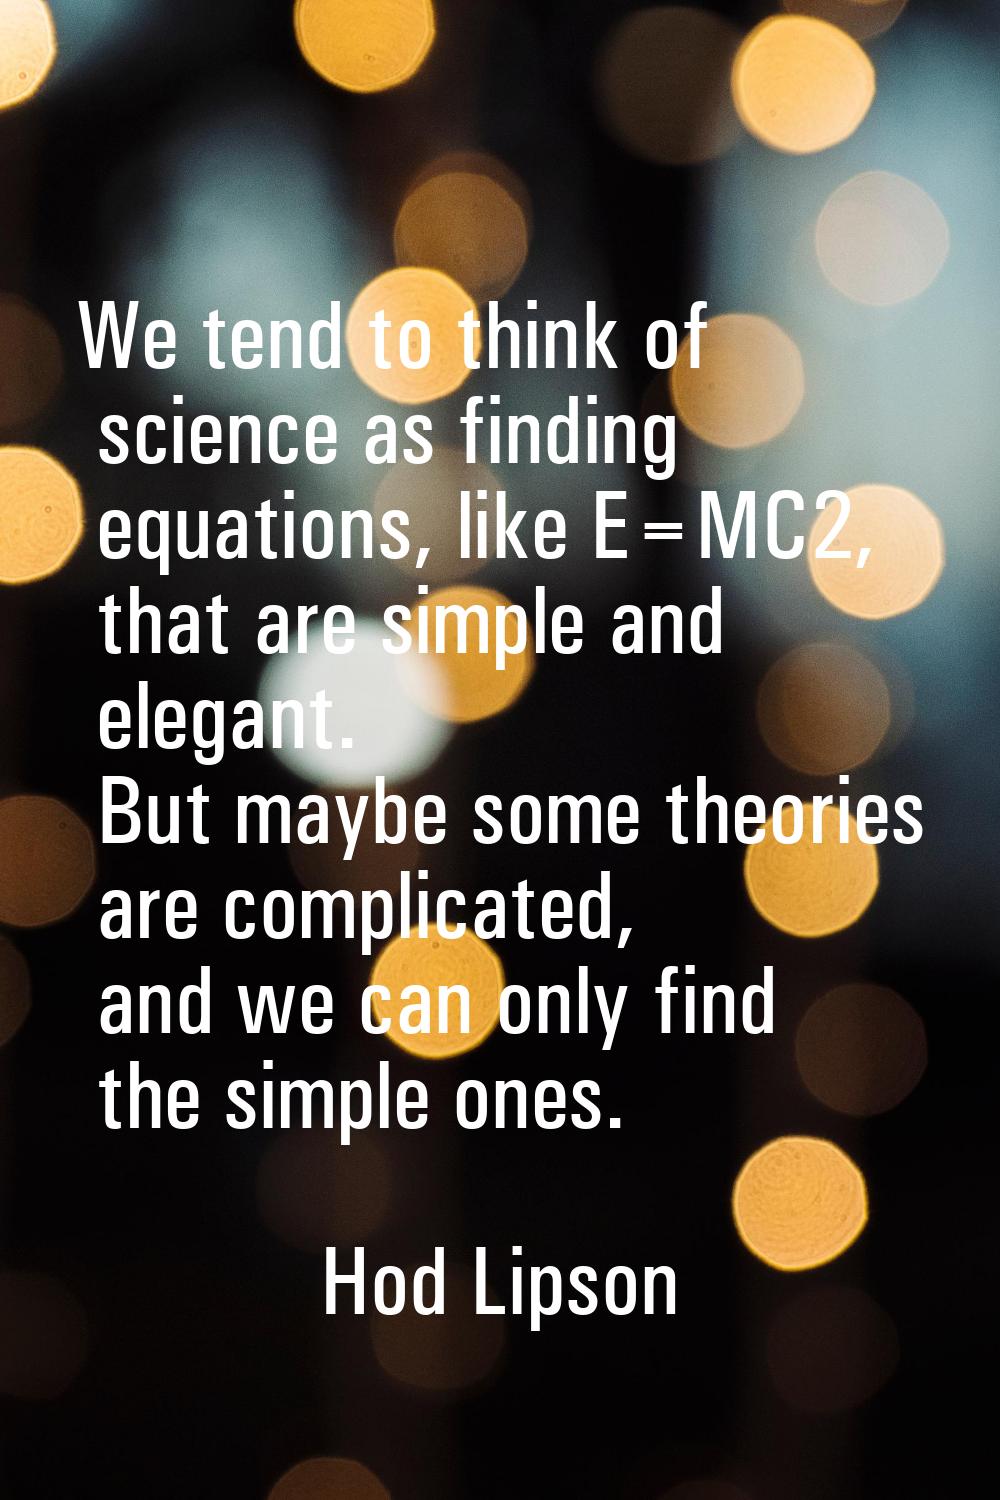 We tend to think of science as finding equations, like E=MC2, that are simple and elegant. But mayb